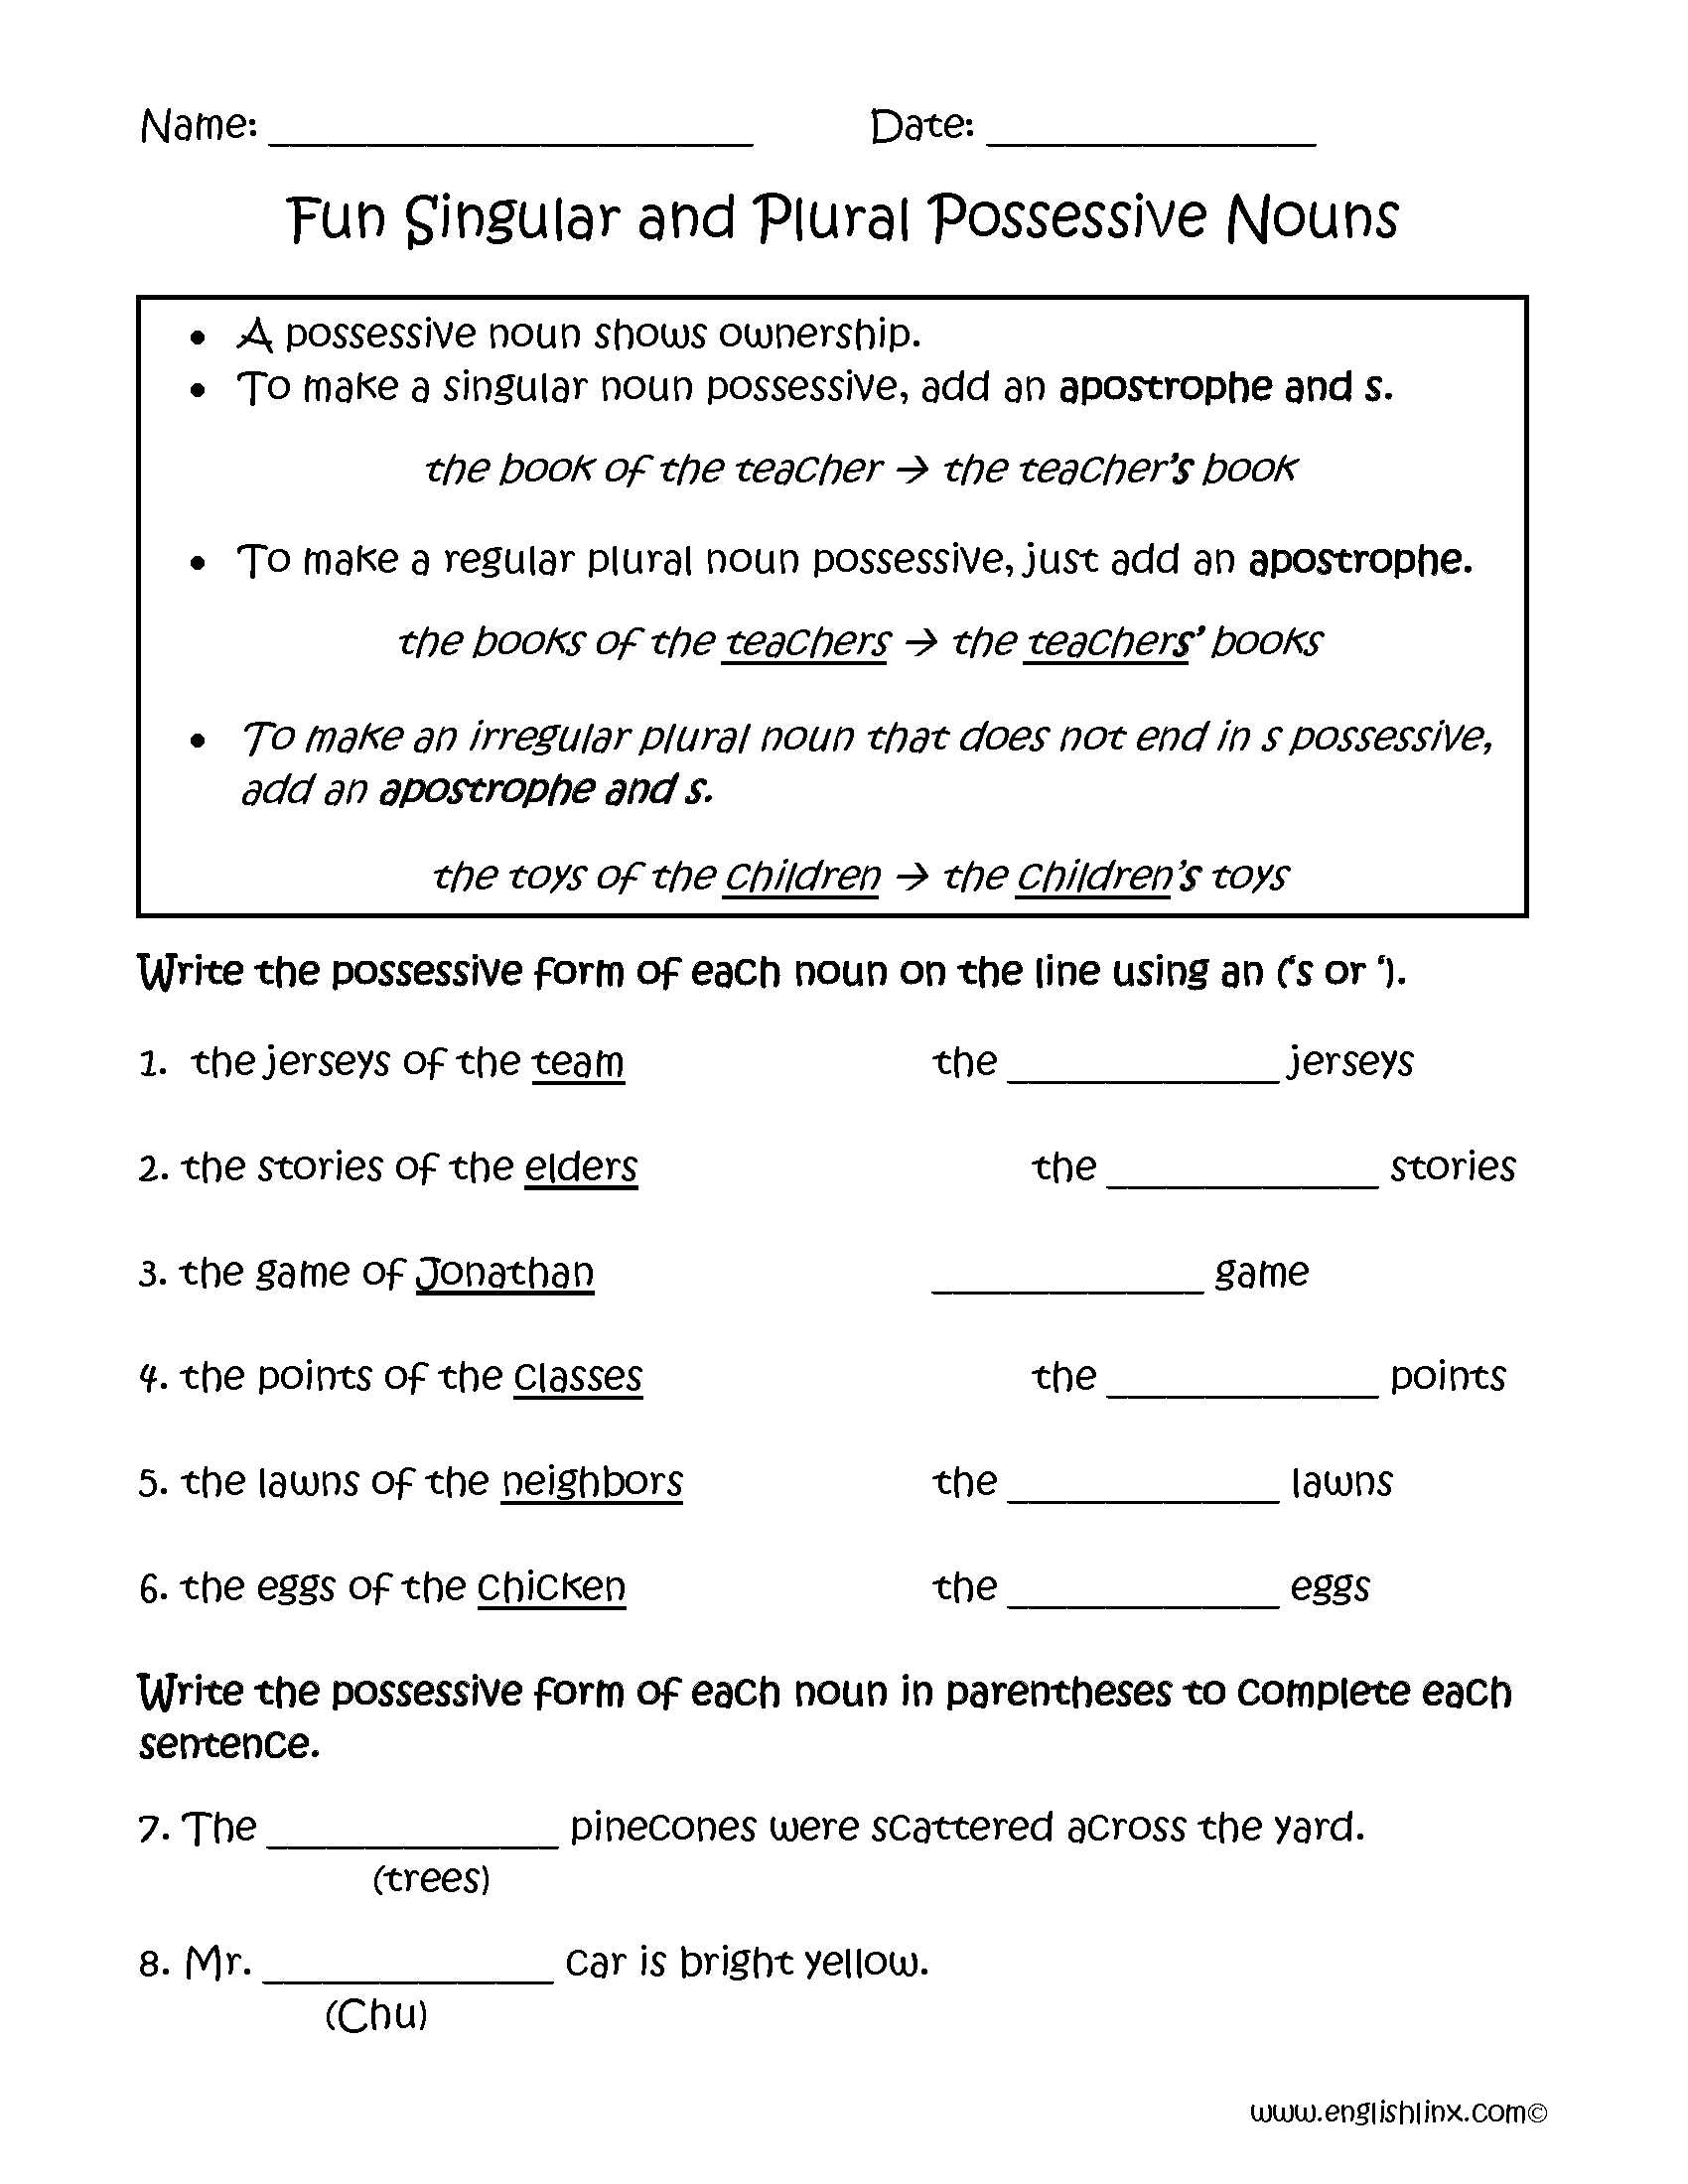 Food Inc Movie Worksheet Answer Key as Well as Fun Singular and Plural Possessive Nouns Worksheets